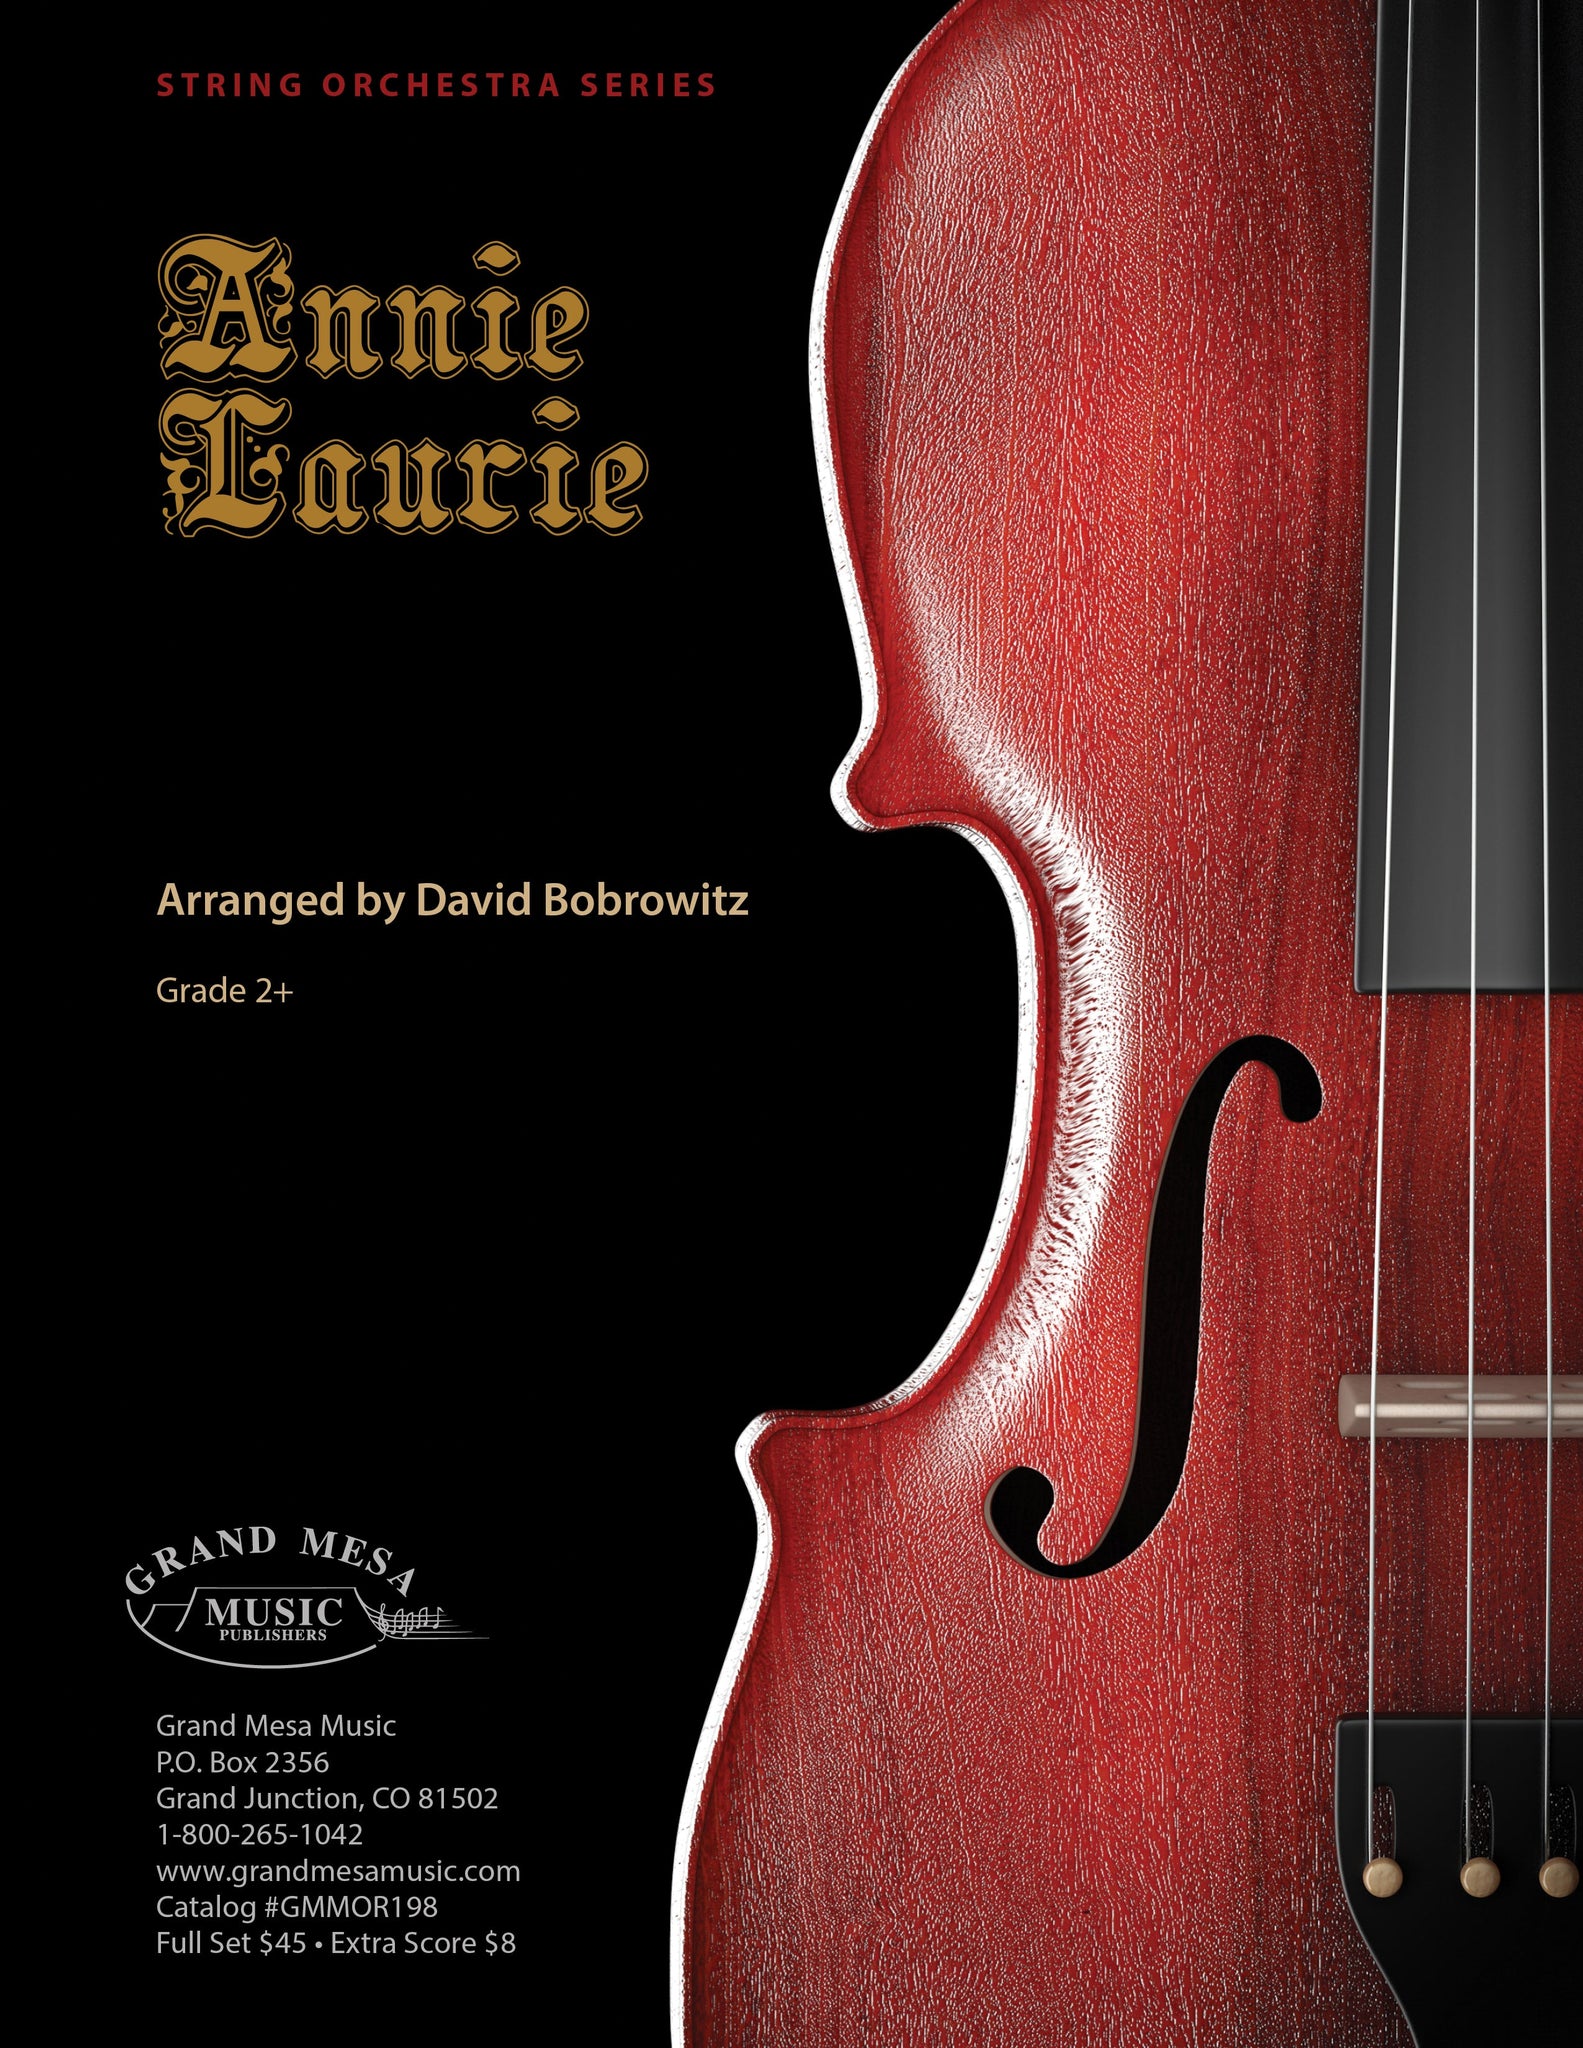 Strings sheet music cover of Annie Laurie, arranged by David Bobrowitz.